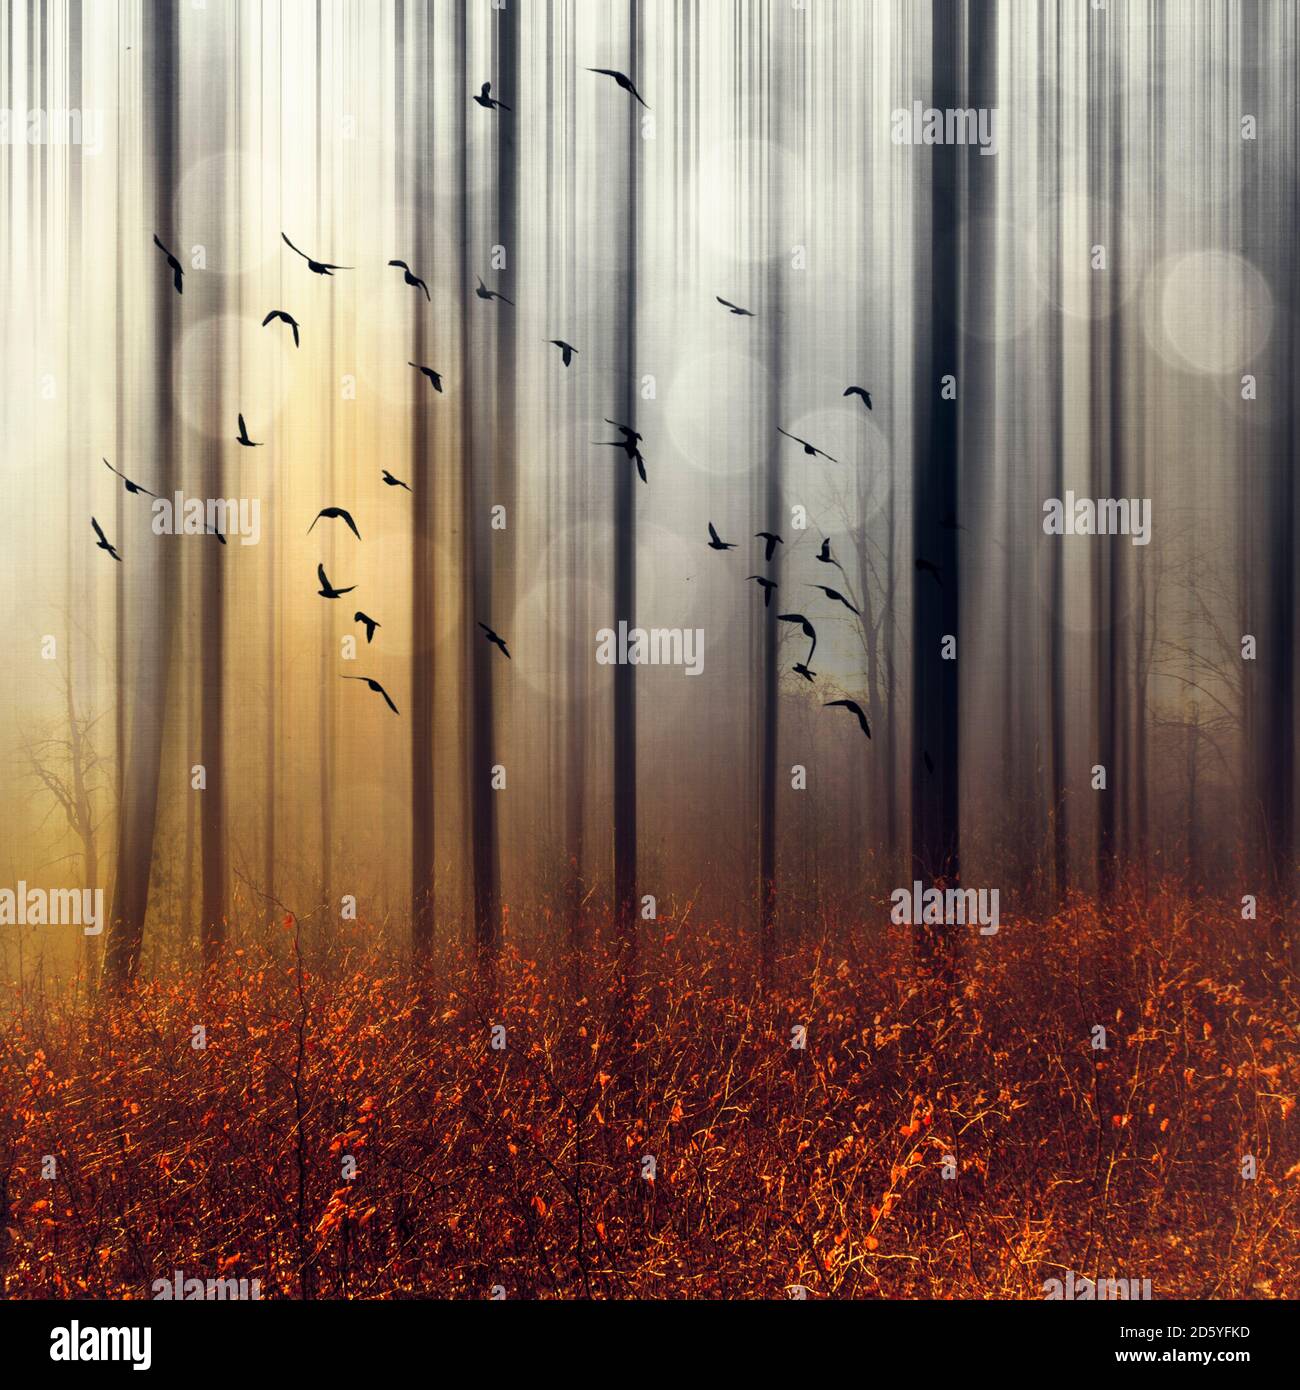 Flock of birds in autumn forest, digitally manipulated Stock Photo